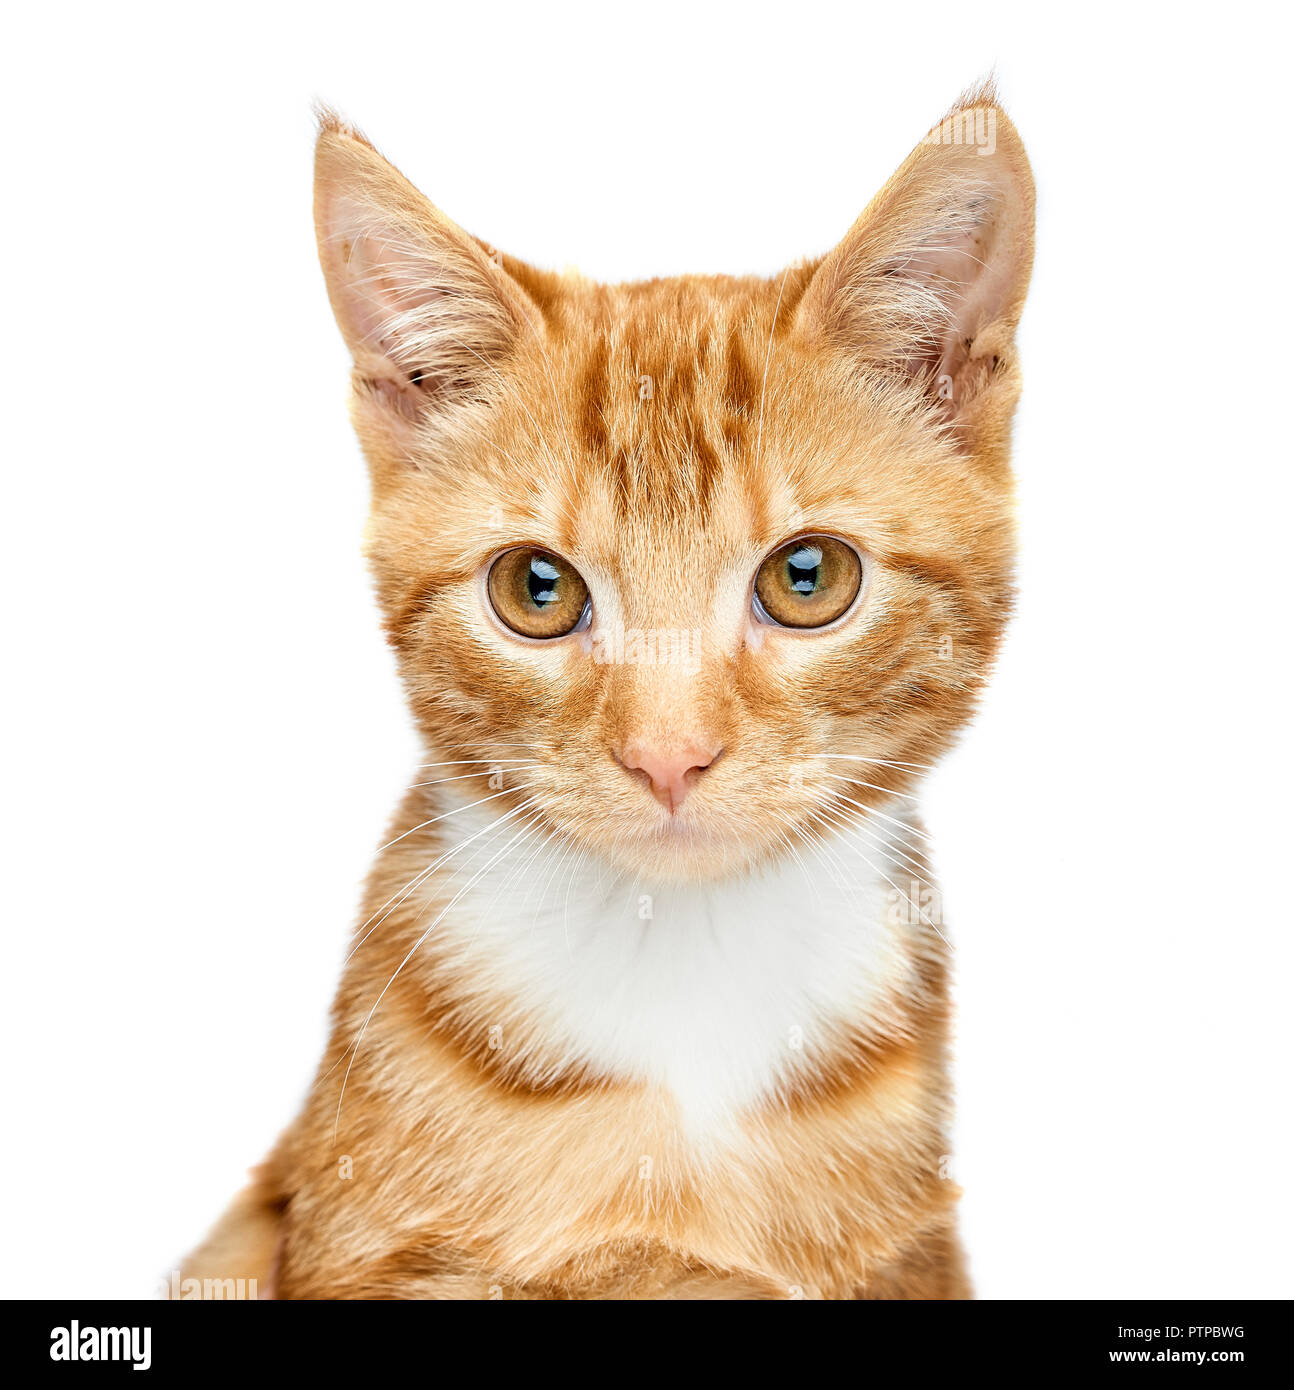 Adorable young ginger red tabby kitten portrait isolated on a white background looking just off camera. Stock Photo